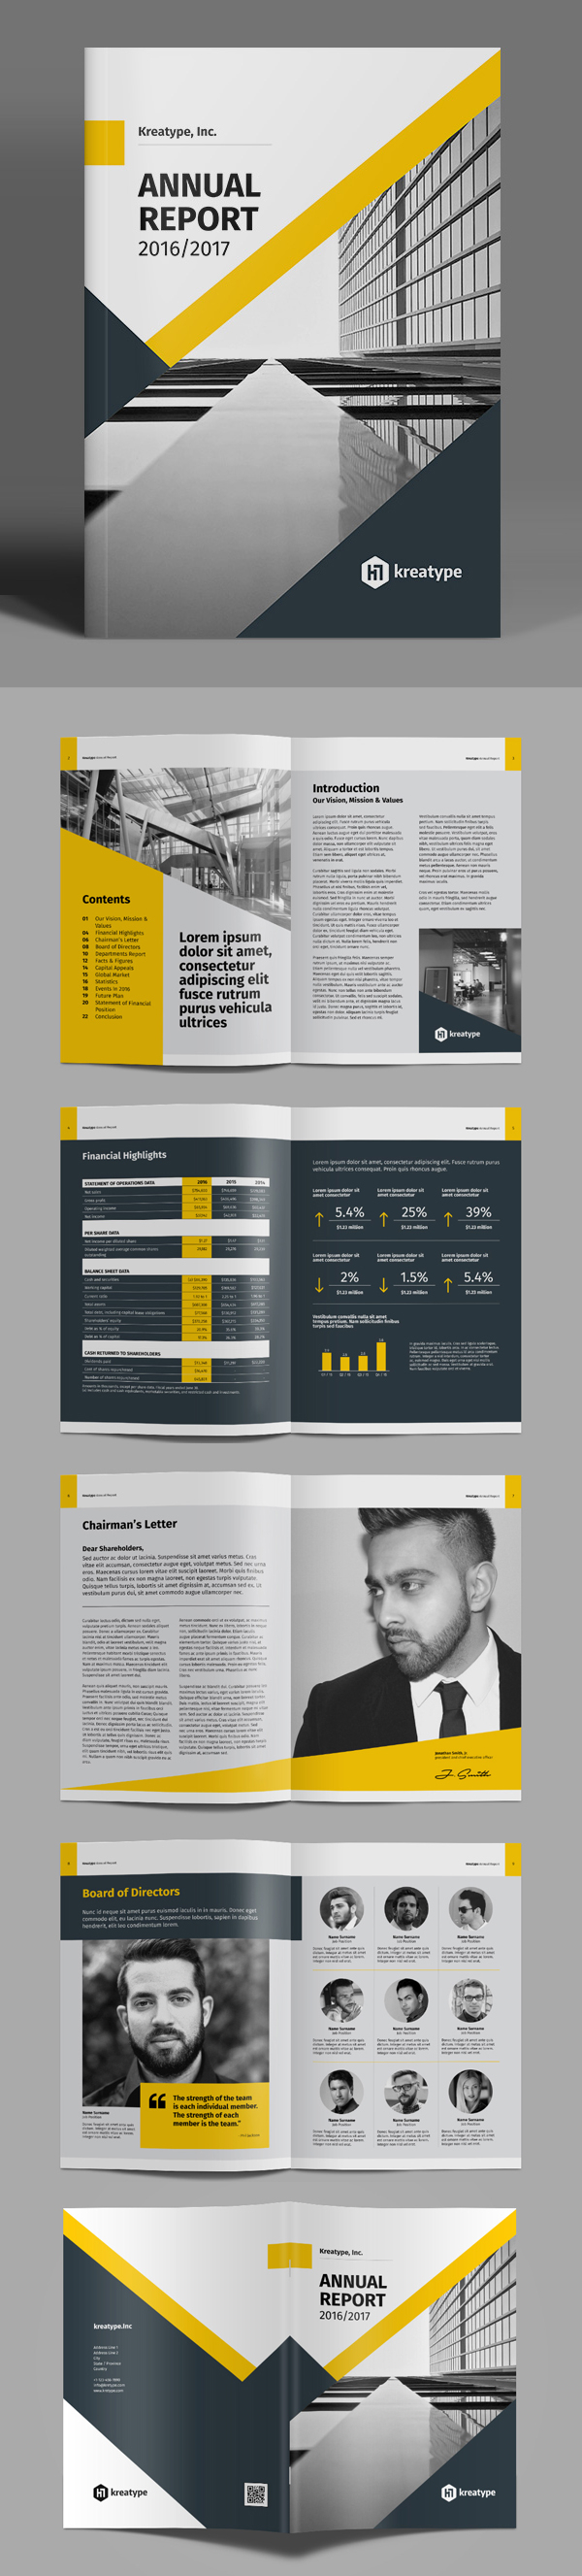 100 Professional Corporate Brochure Templates | Design Within Chairman's Annual Report Template